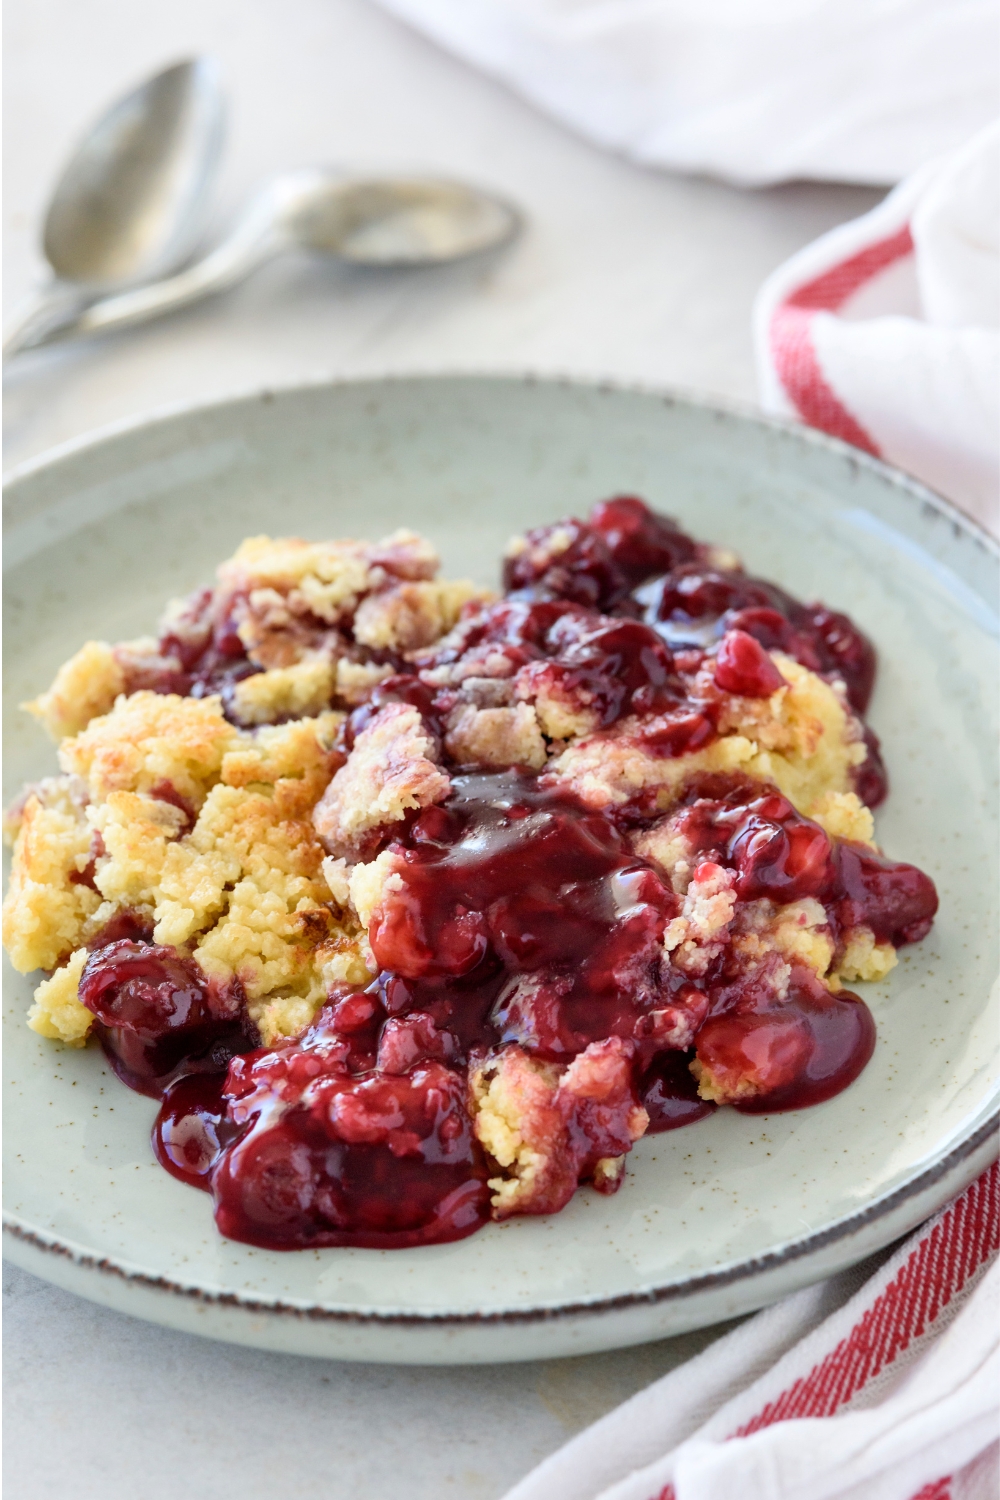 A plate with cherry dump cake.